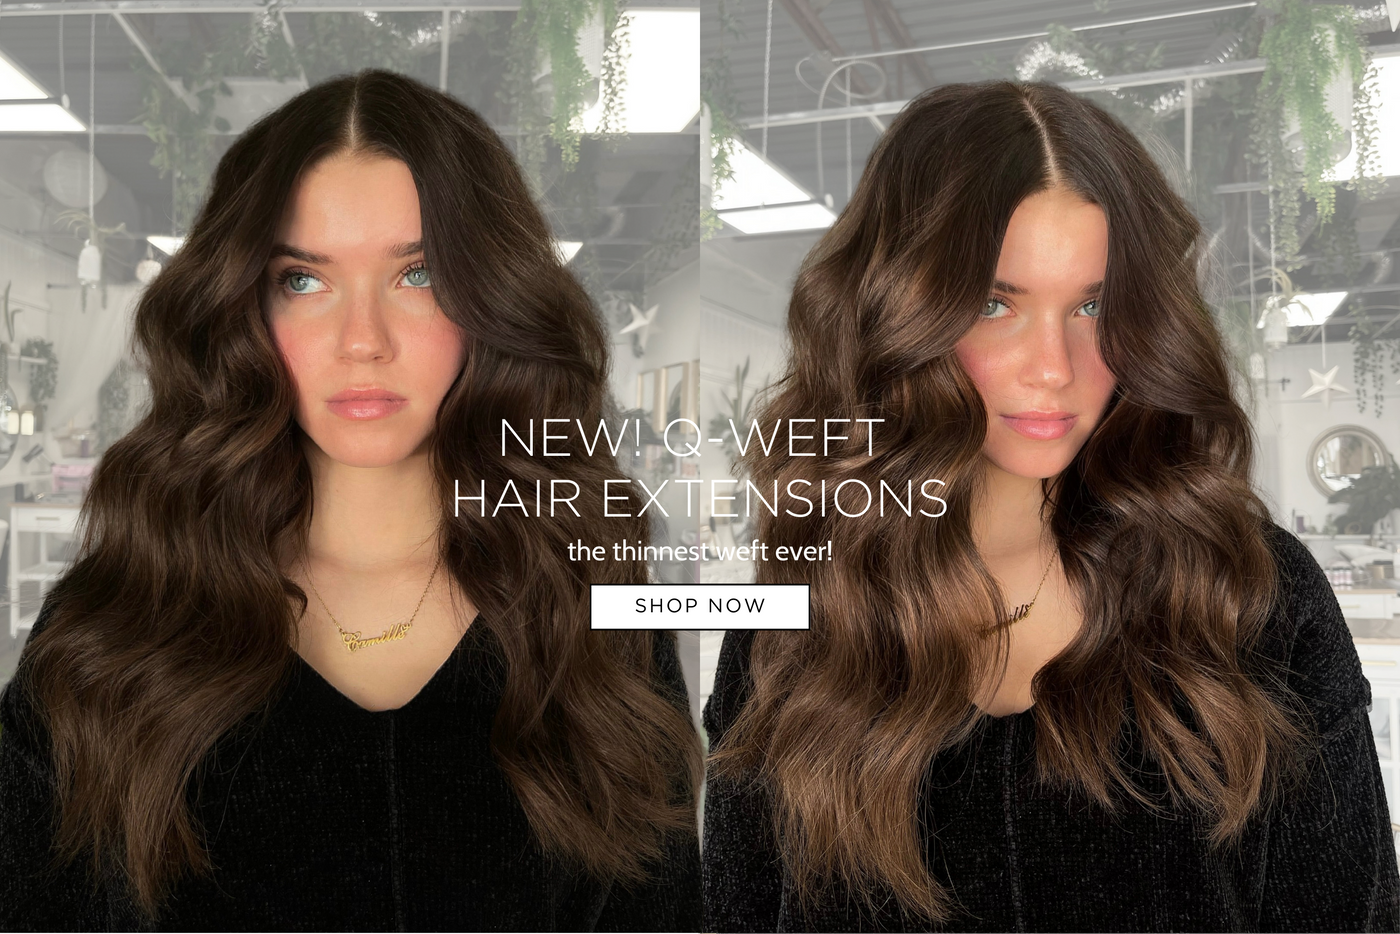 https://www.ywigs.com/collections/clip-in-hair-extension – Ywigs